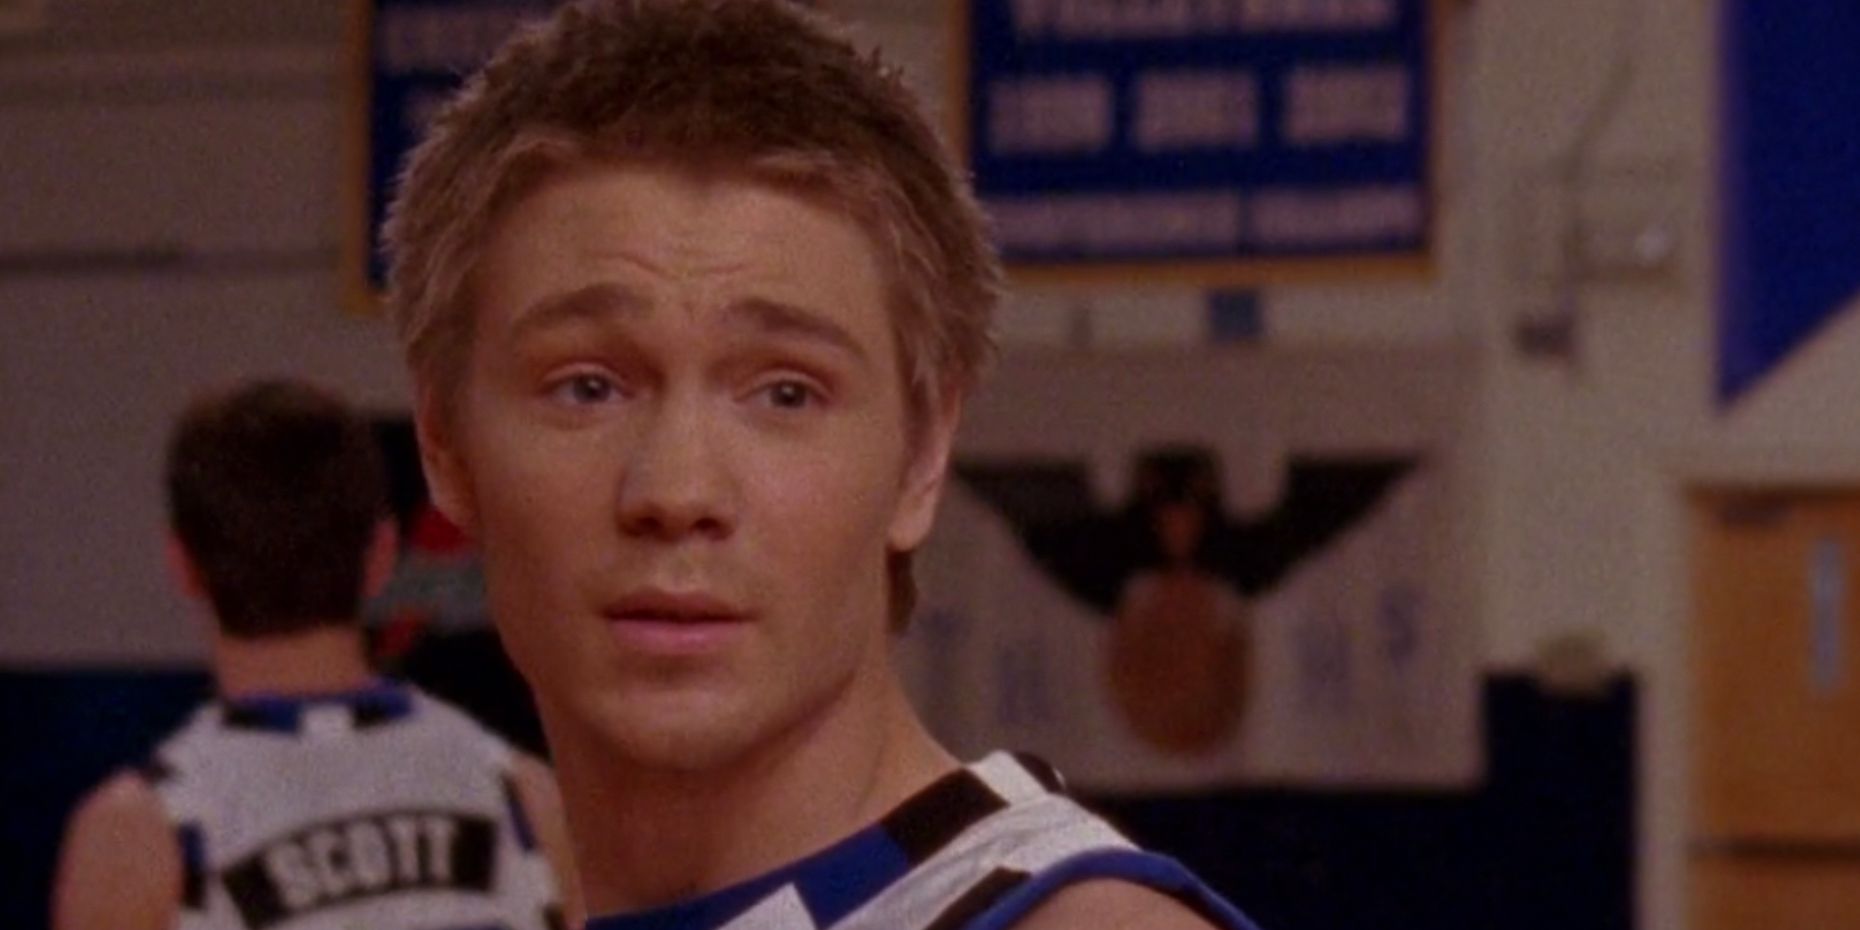 Lucas looks over his shoulder during the basketball game in the One Tree Hill season 1 finale